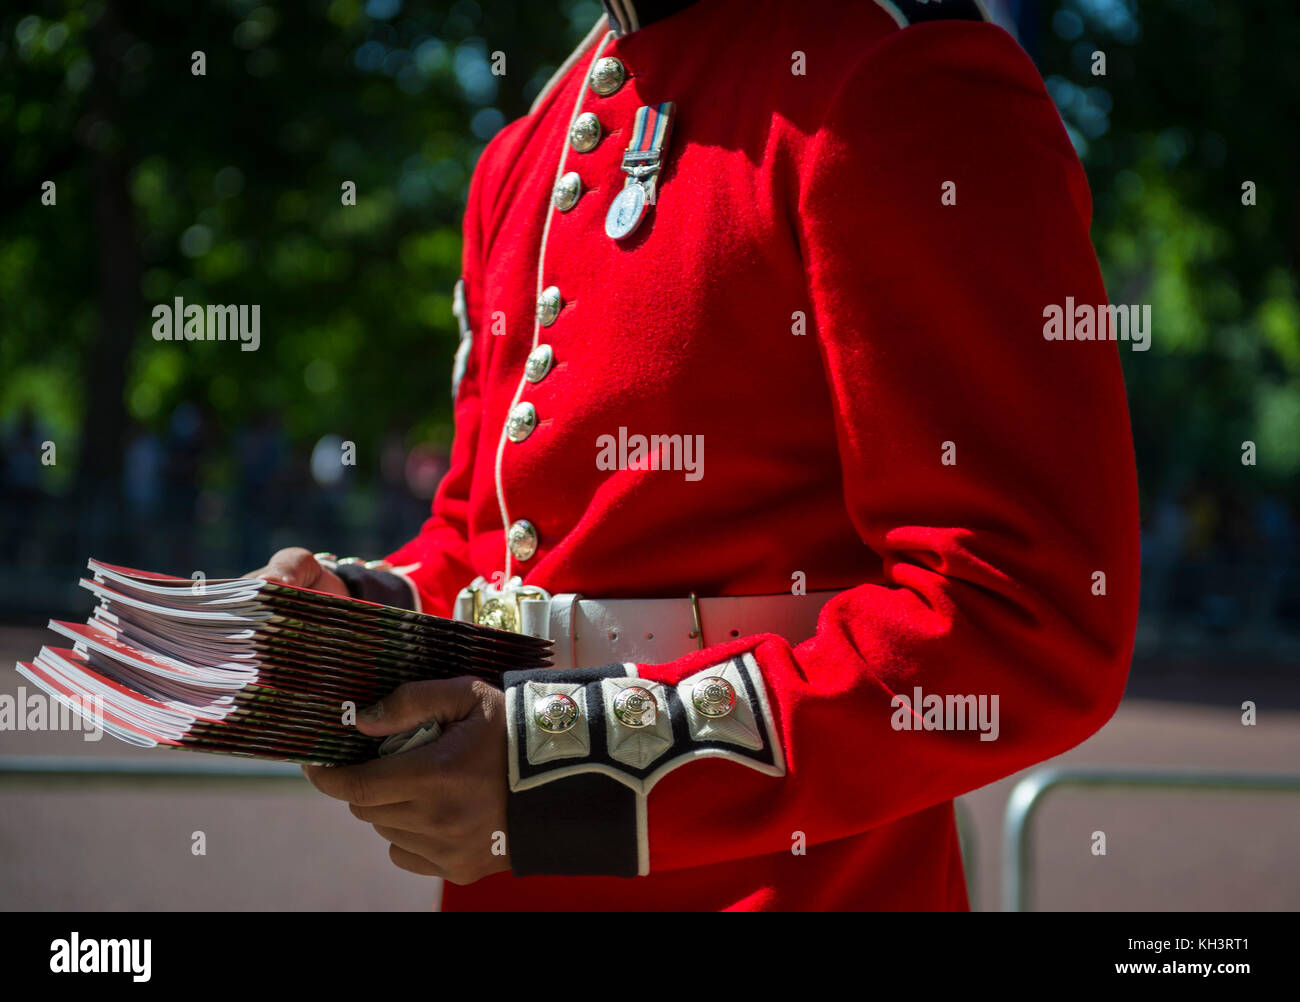 Queen's Royal Guard soldier handing out pamphlets at a celebration in London, England Stock Photo